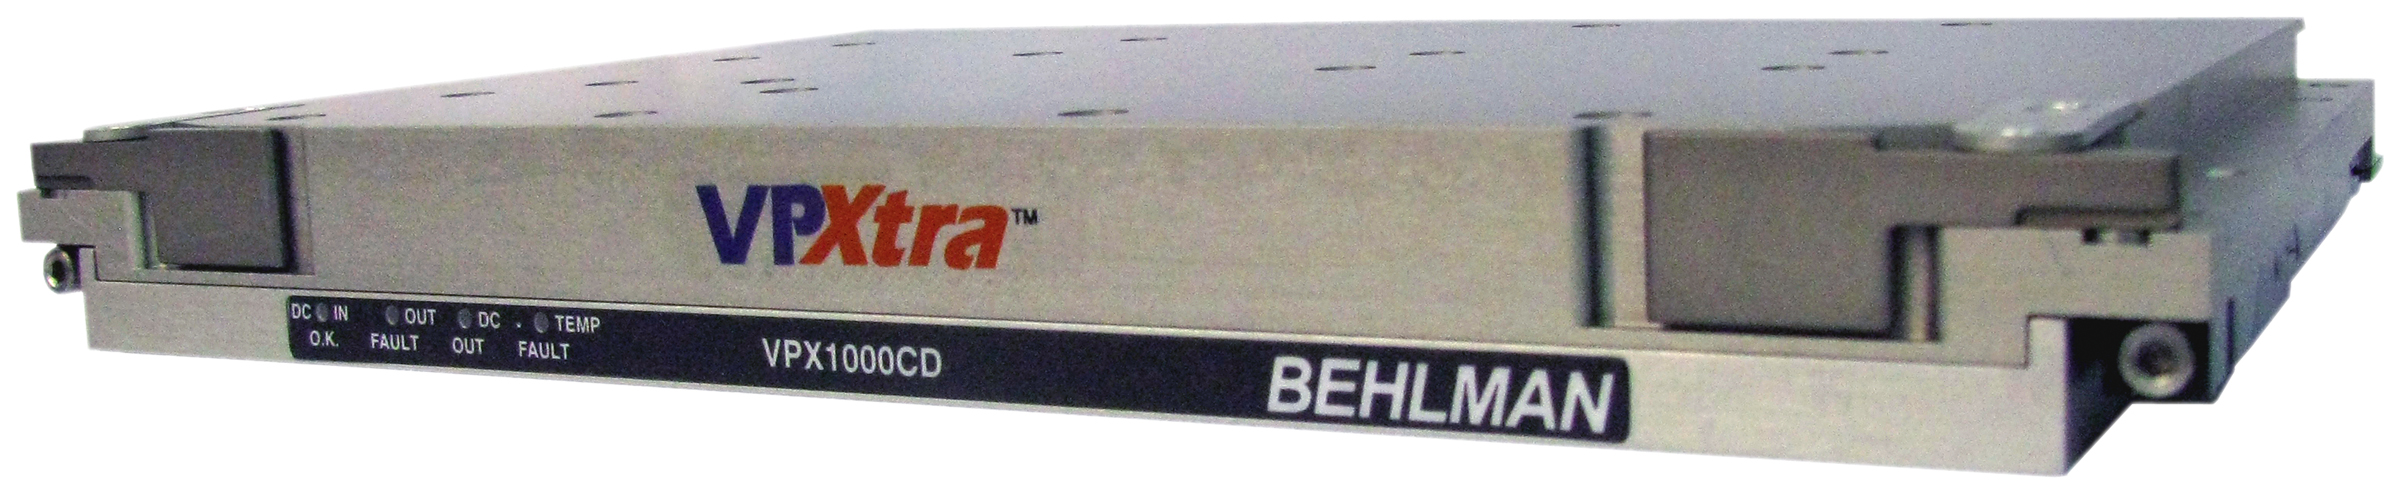 The Behlman VPXtra™ 1000CD COTS Power Supply is single-slot 6U, Open VPX compliant, to ensure VPX rack compatibility. It delivers up to 1000 watts of 12 VDC plus 3.3 VDC.